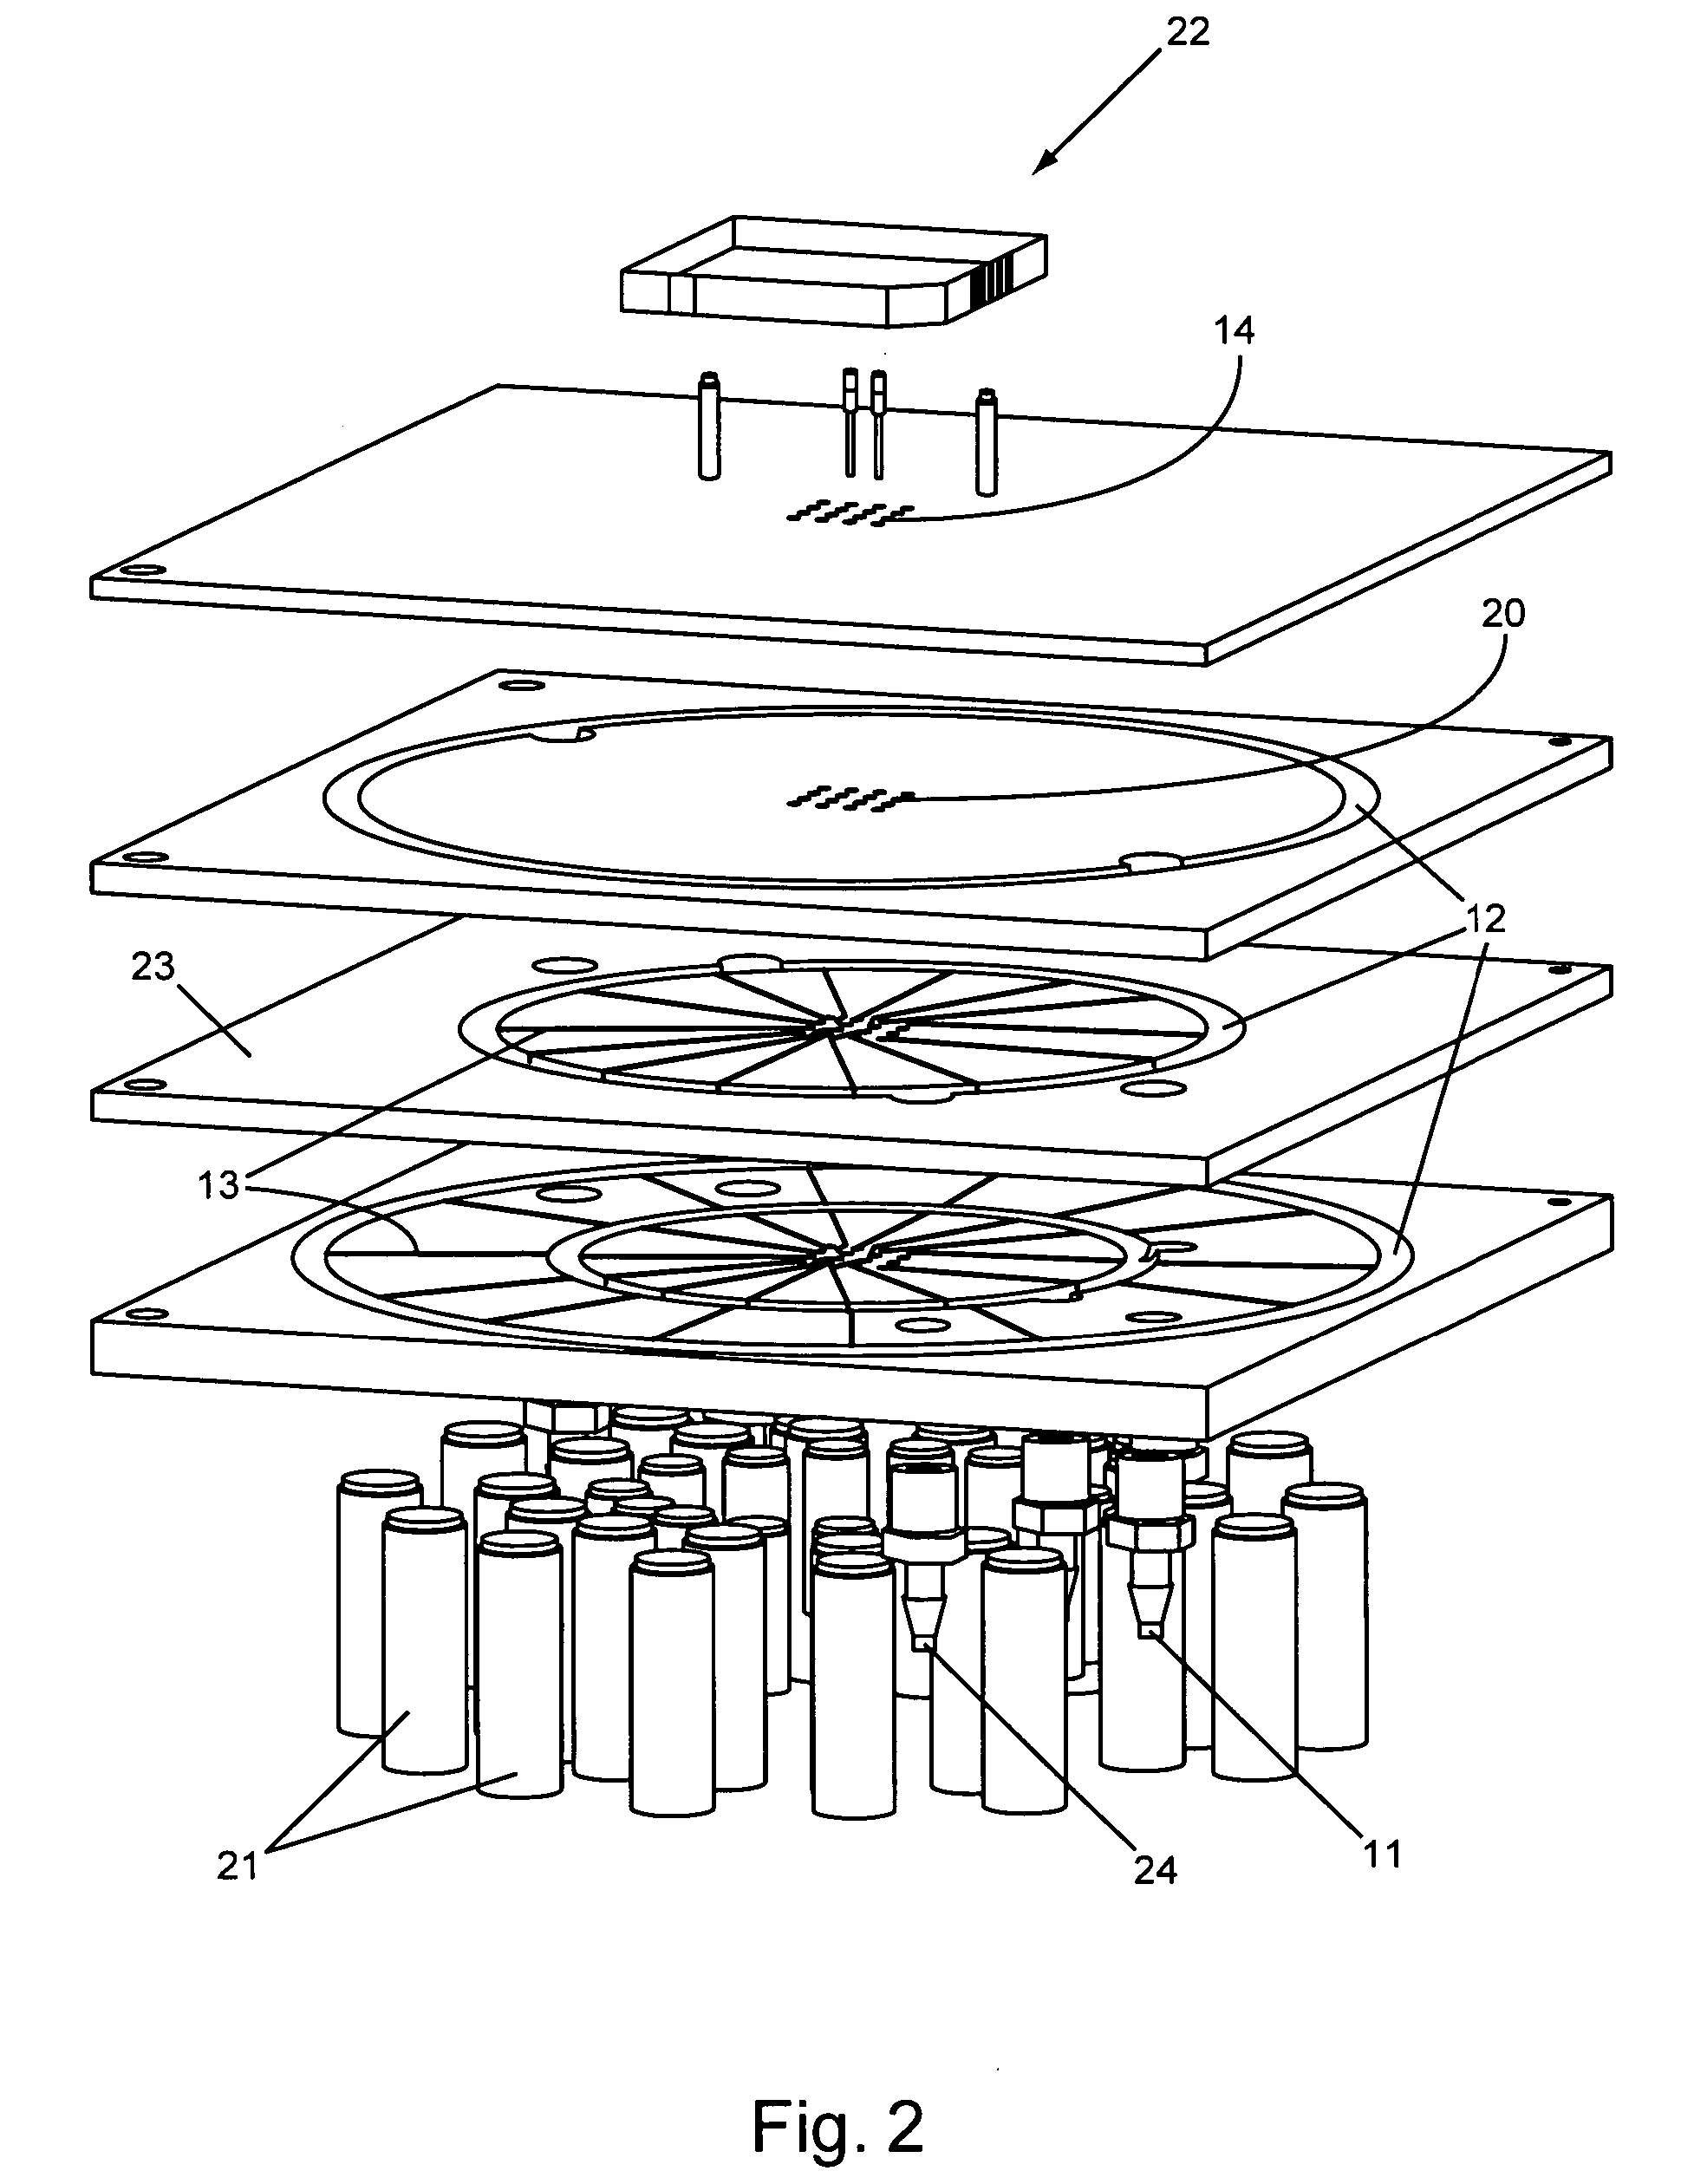 Methods and systems for processing microscale devices for reuse